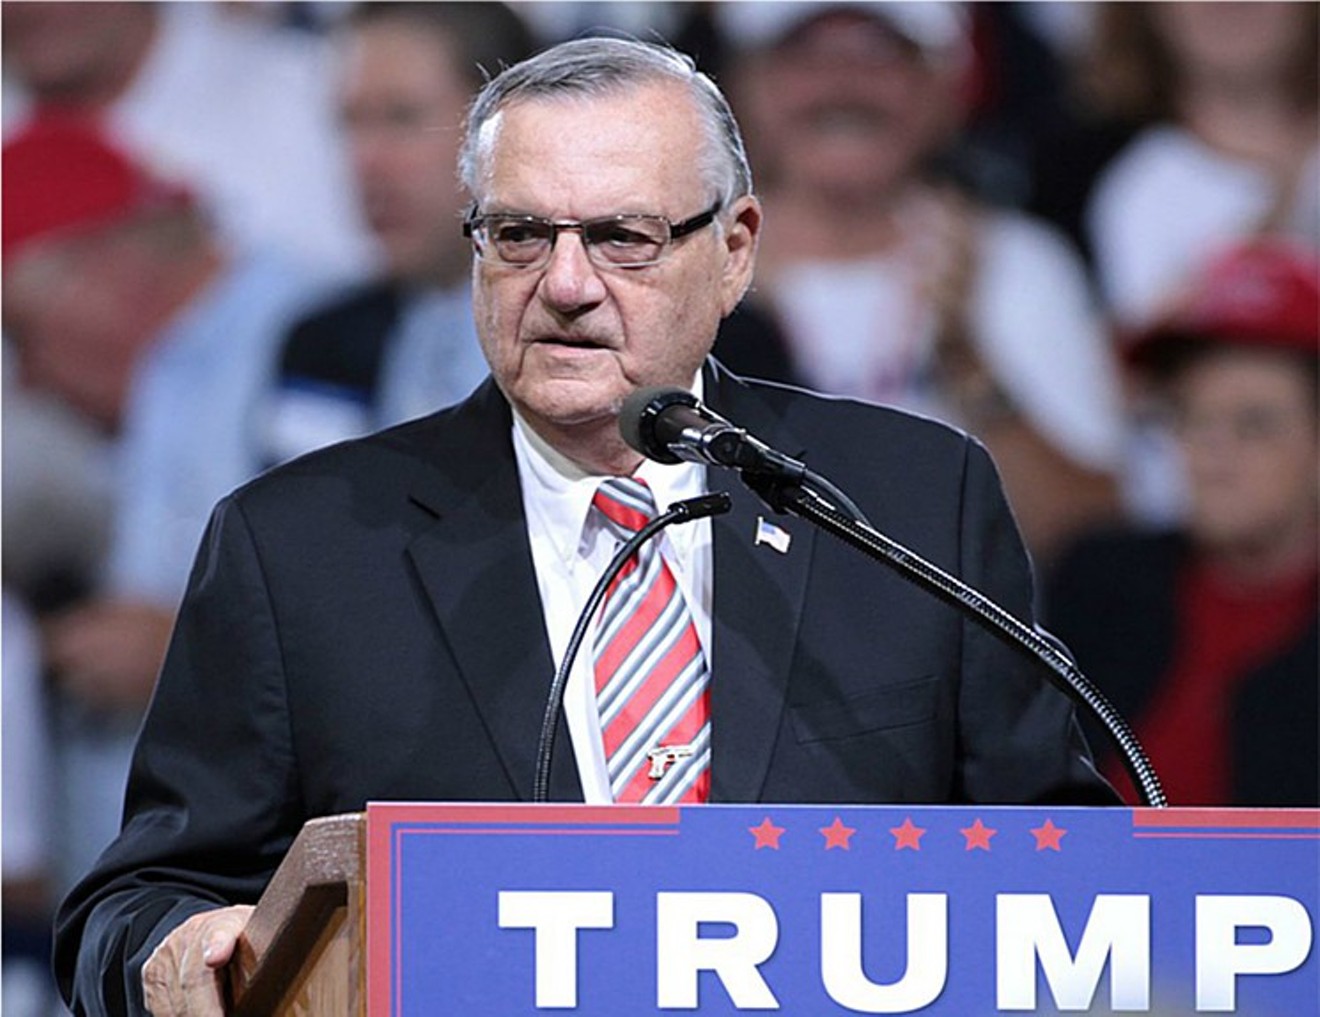 Rumors are circulating that former sheriff and Trump loyalist Joe Arpaio will not make an appearance at the rally tomorrow.